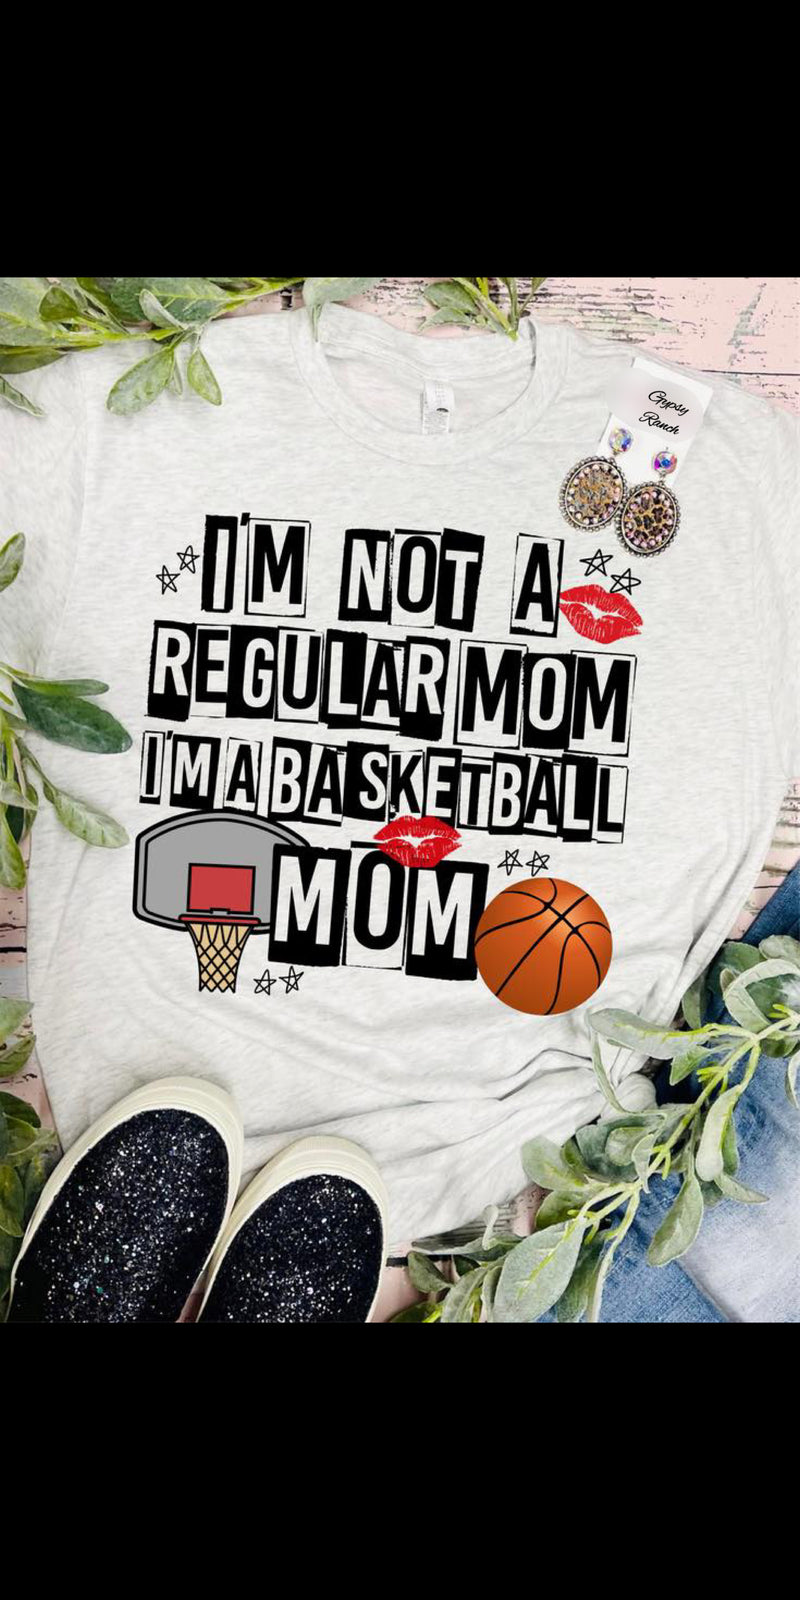 I’m Not A Regular Mom I’m A BASKETBALL Mom Top - Also in Plus Size